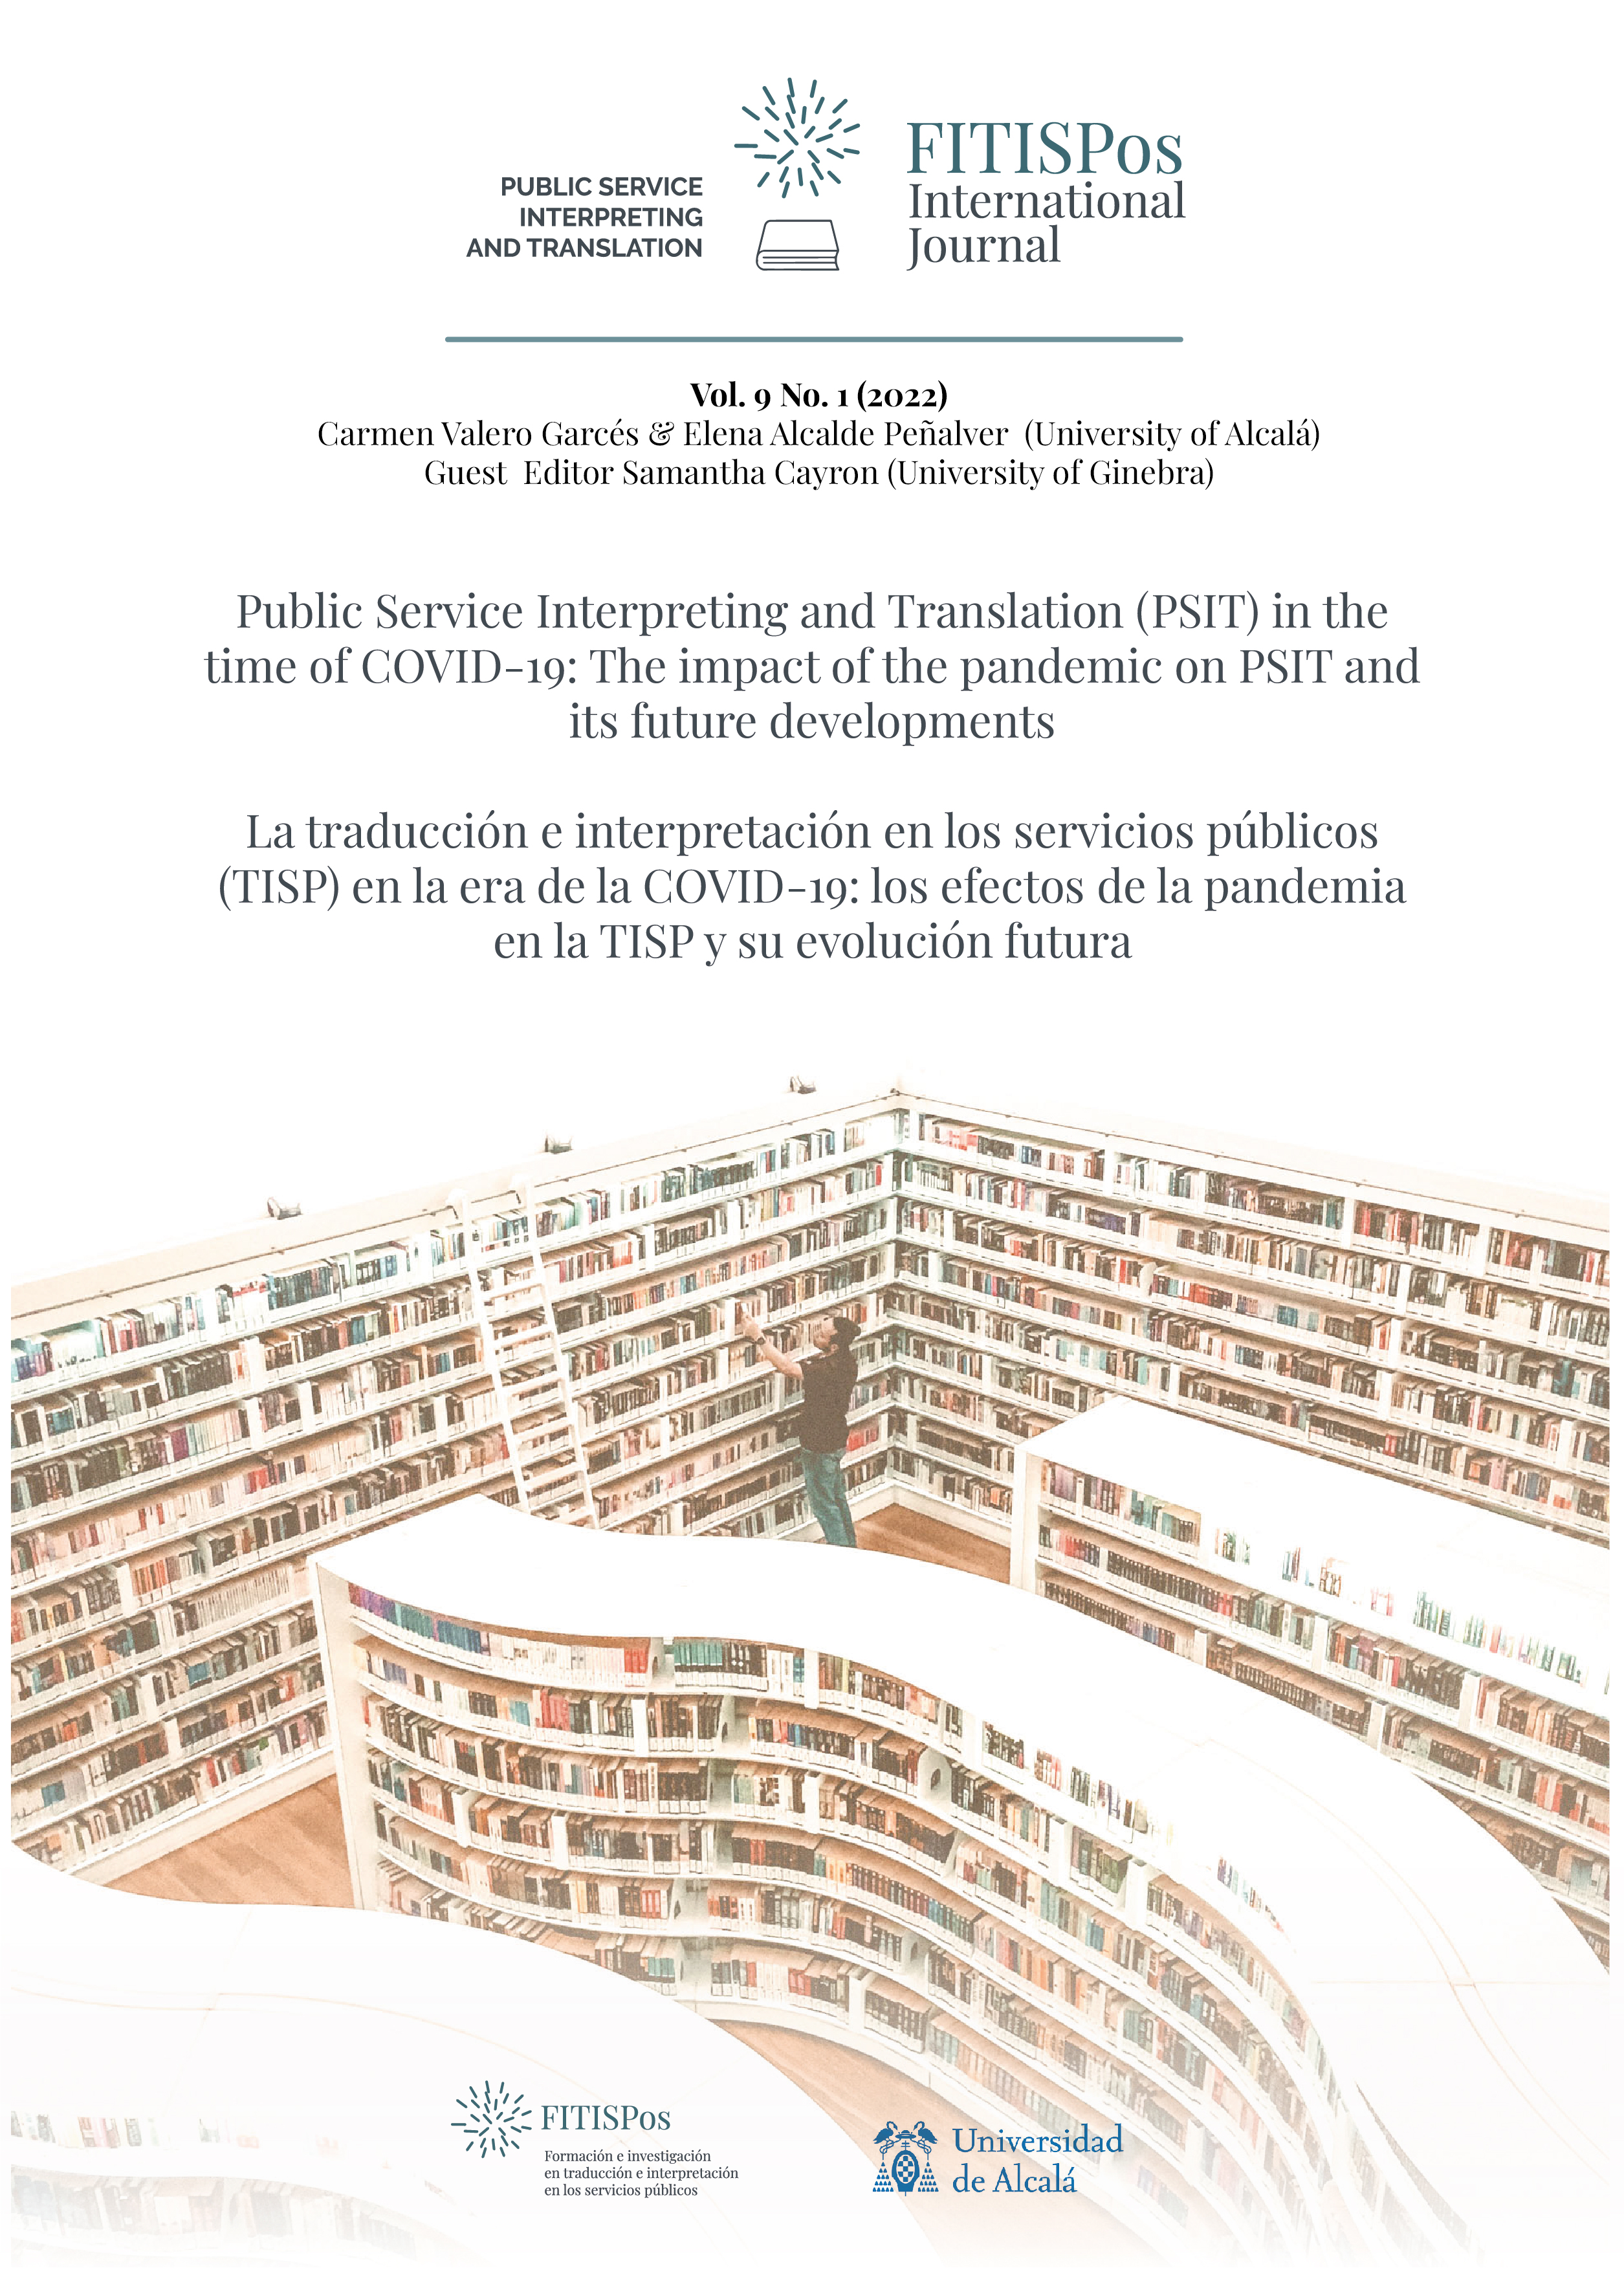 					View Vol. 1 No. 9 (2022): The impact of the COVID-19 pandemic on Public Service Interpreting and Translation (PSIT) and its future developments
				